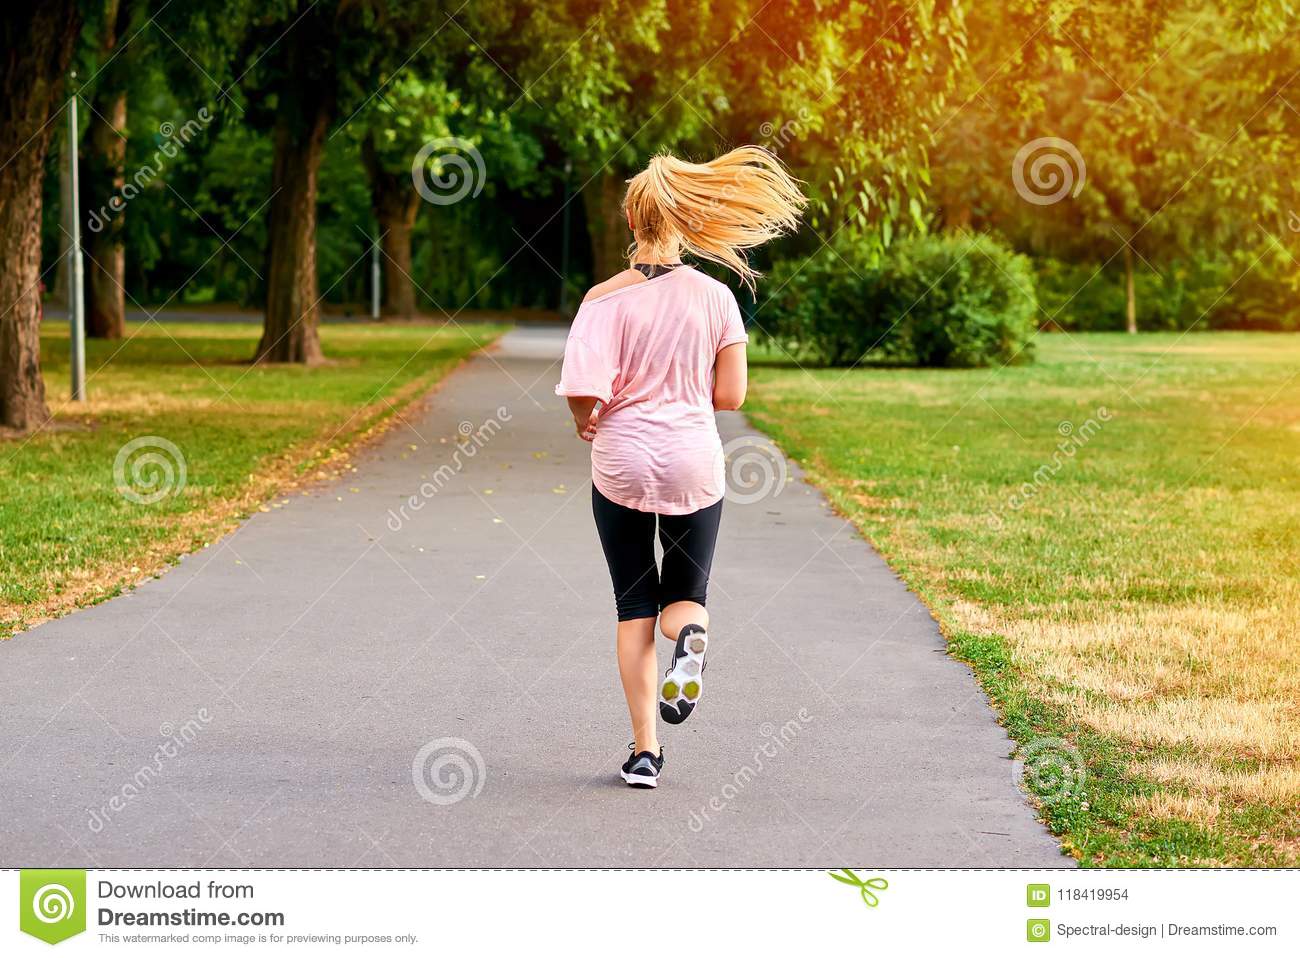 Young woman running away on the road in a park stock photo